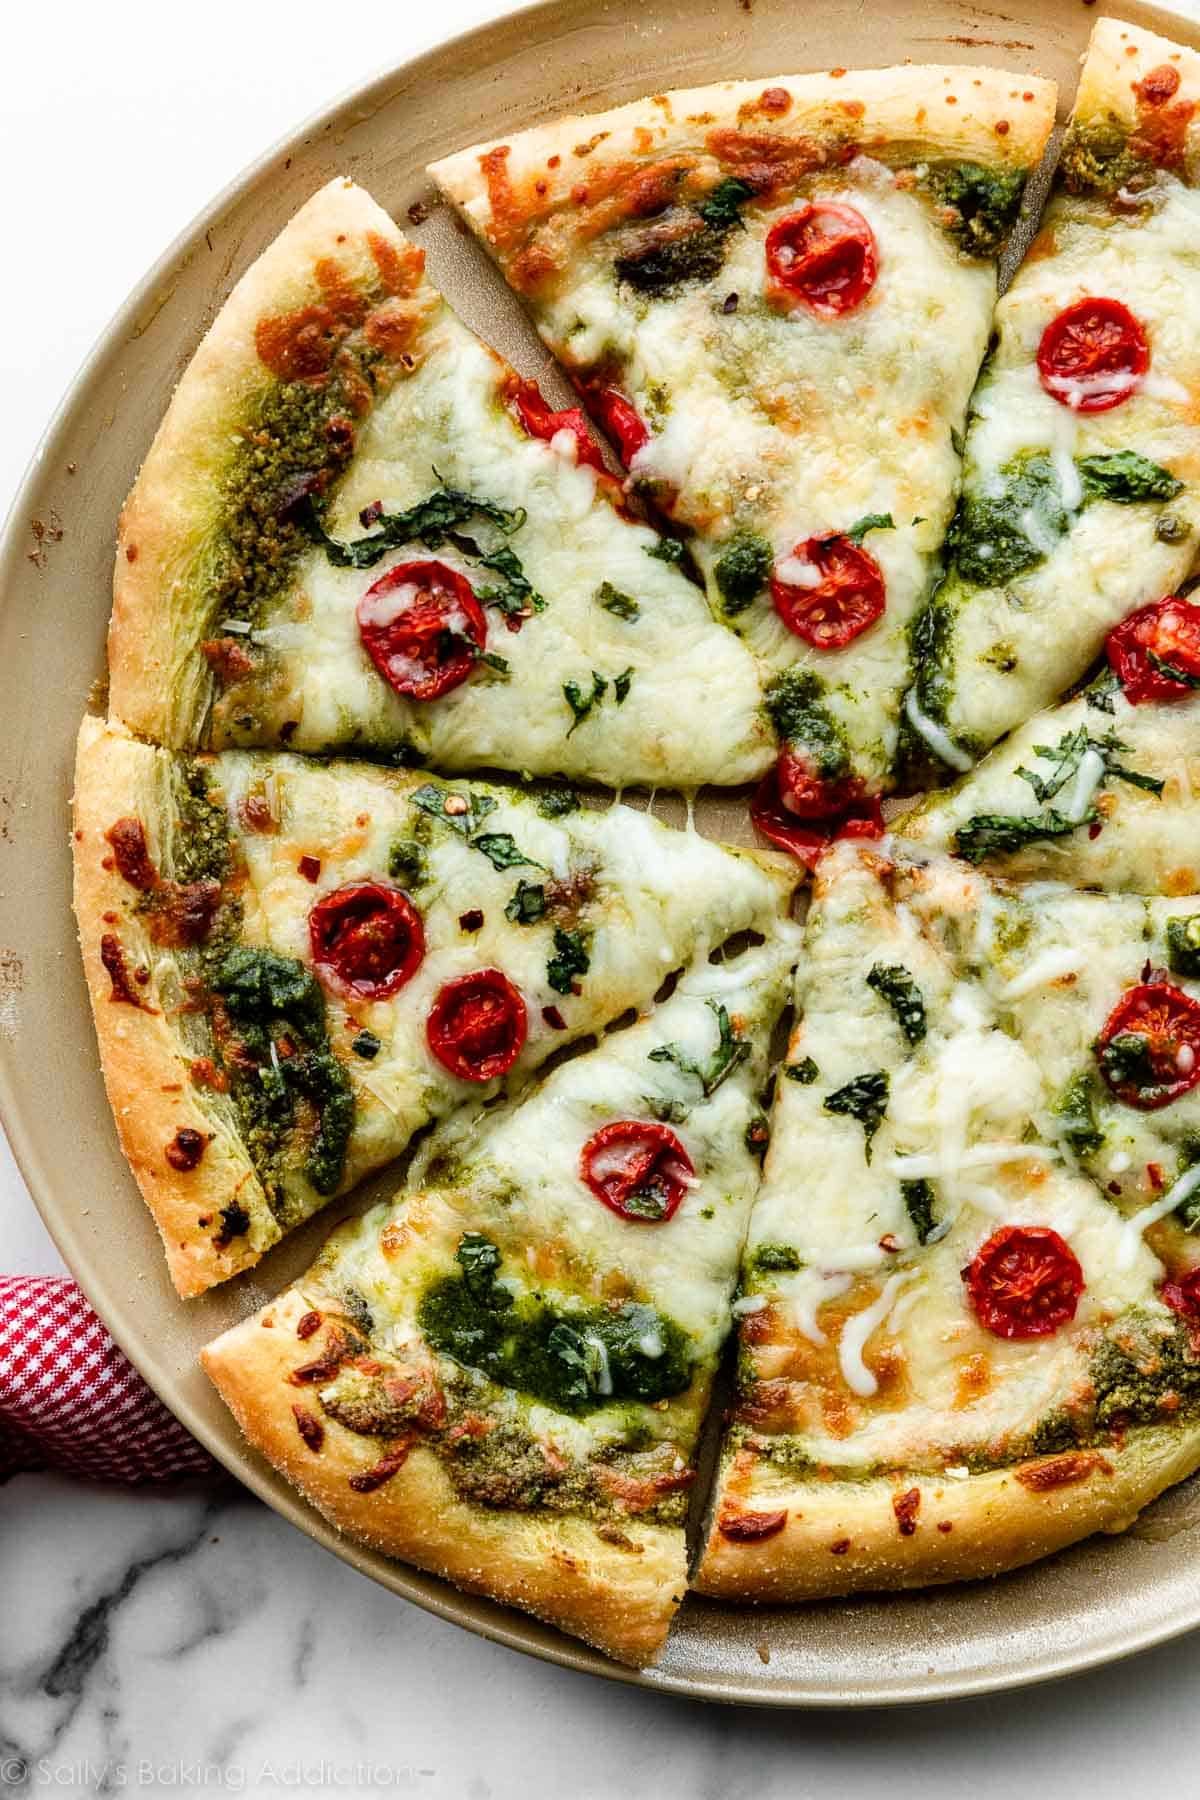 baked and sliced pesto pizza with mozzarella cheese and tomatoes.